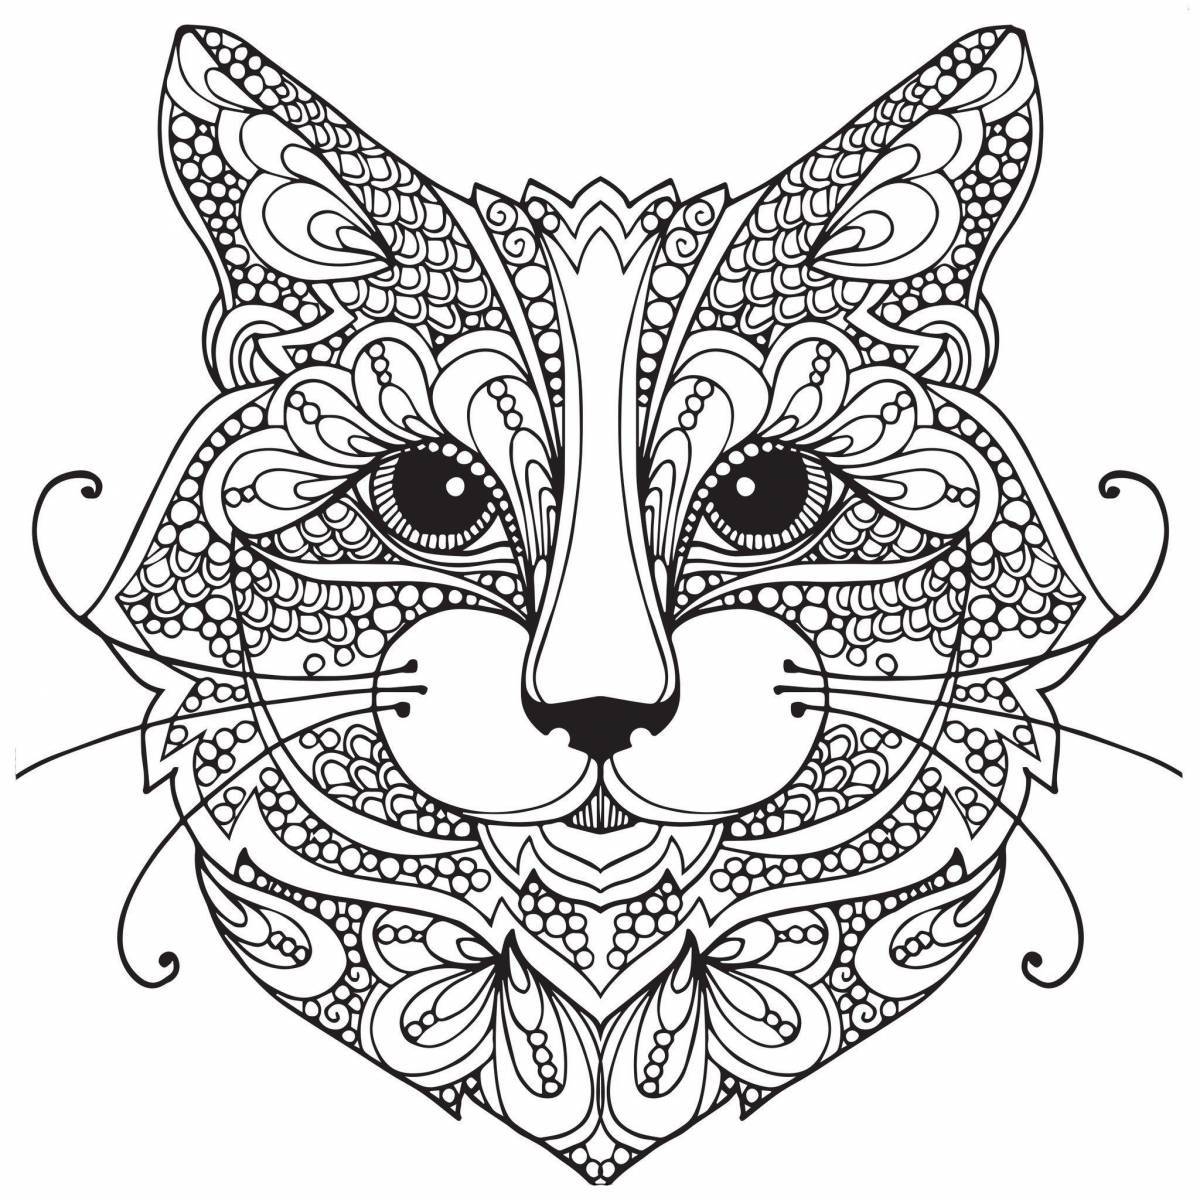 Amazing complex animal coloring pages